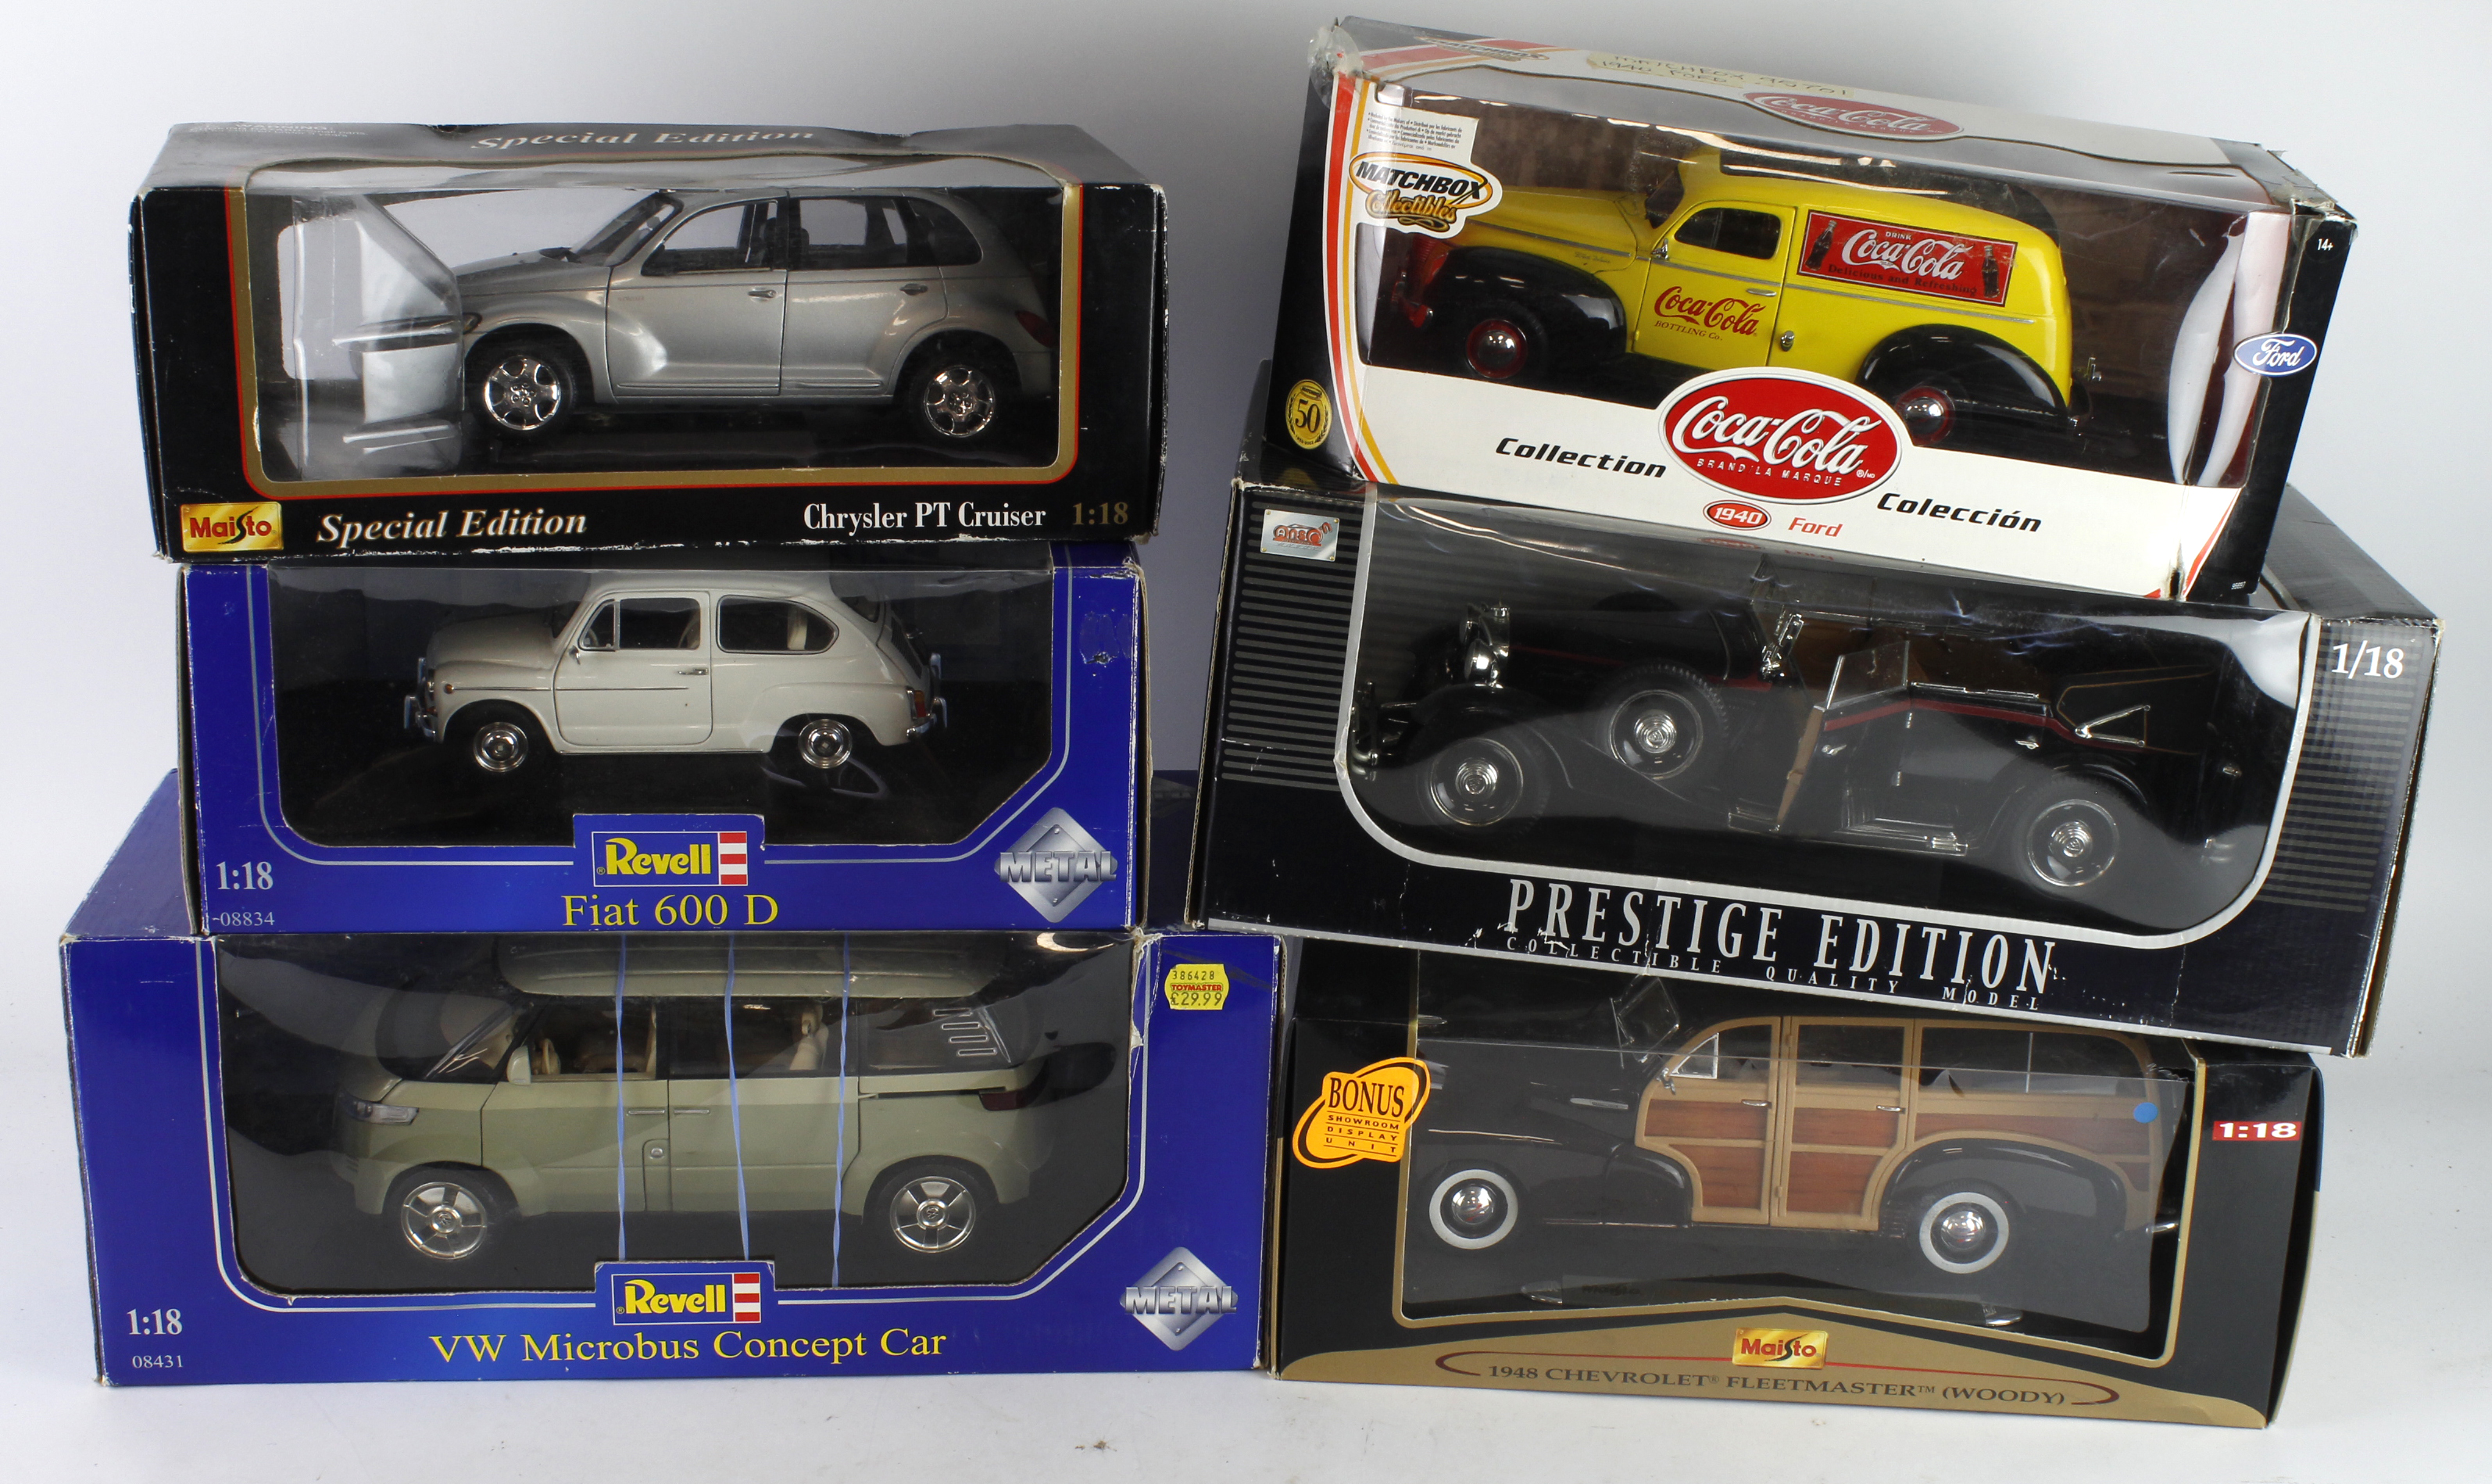 Models. Six boxed 1:18 scale models, including Revell VW Microbus Concept Car (08431); Revell Fiat